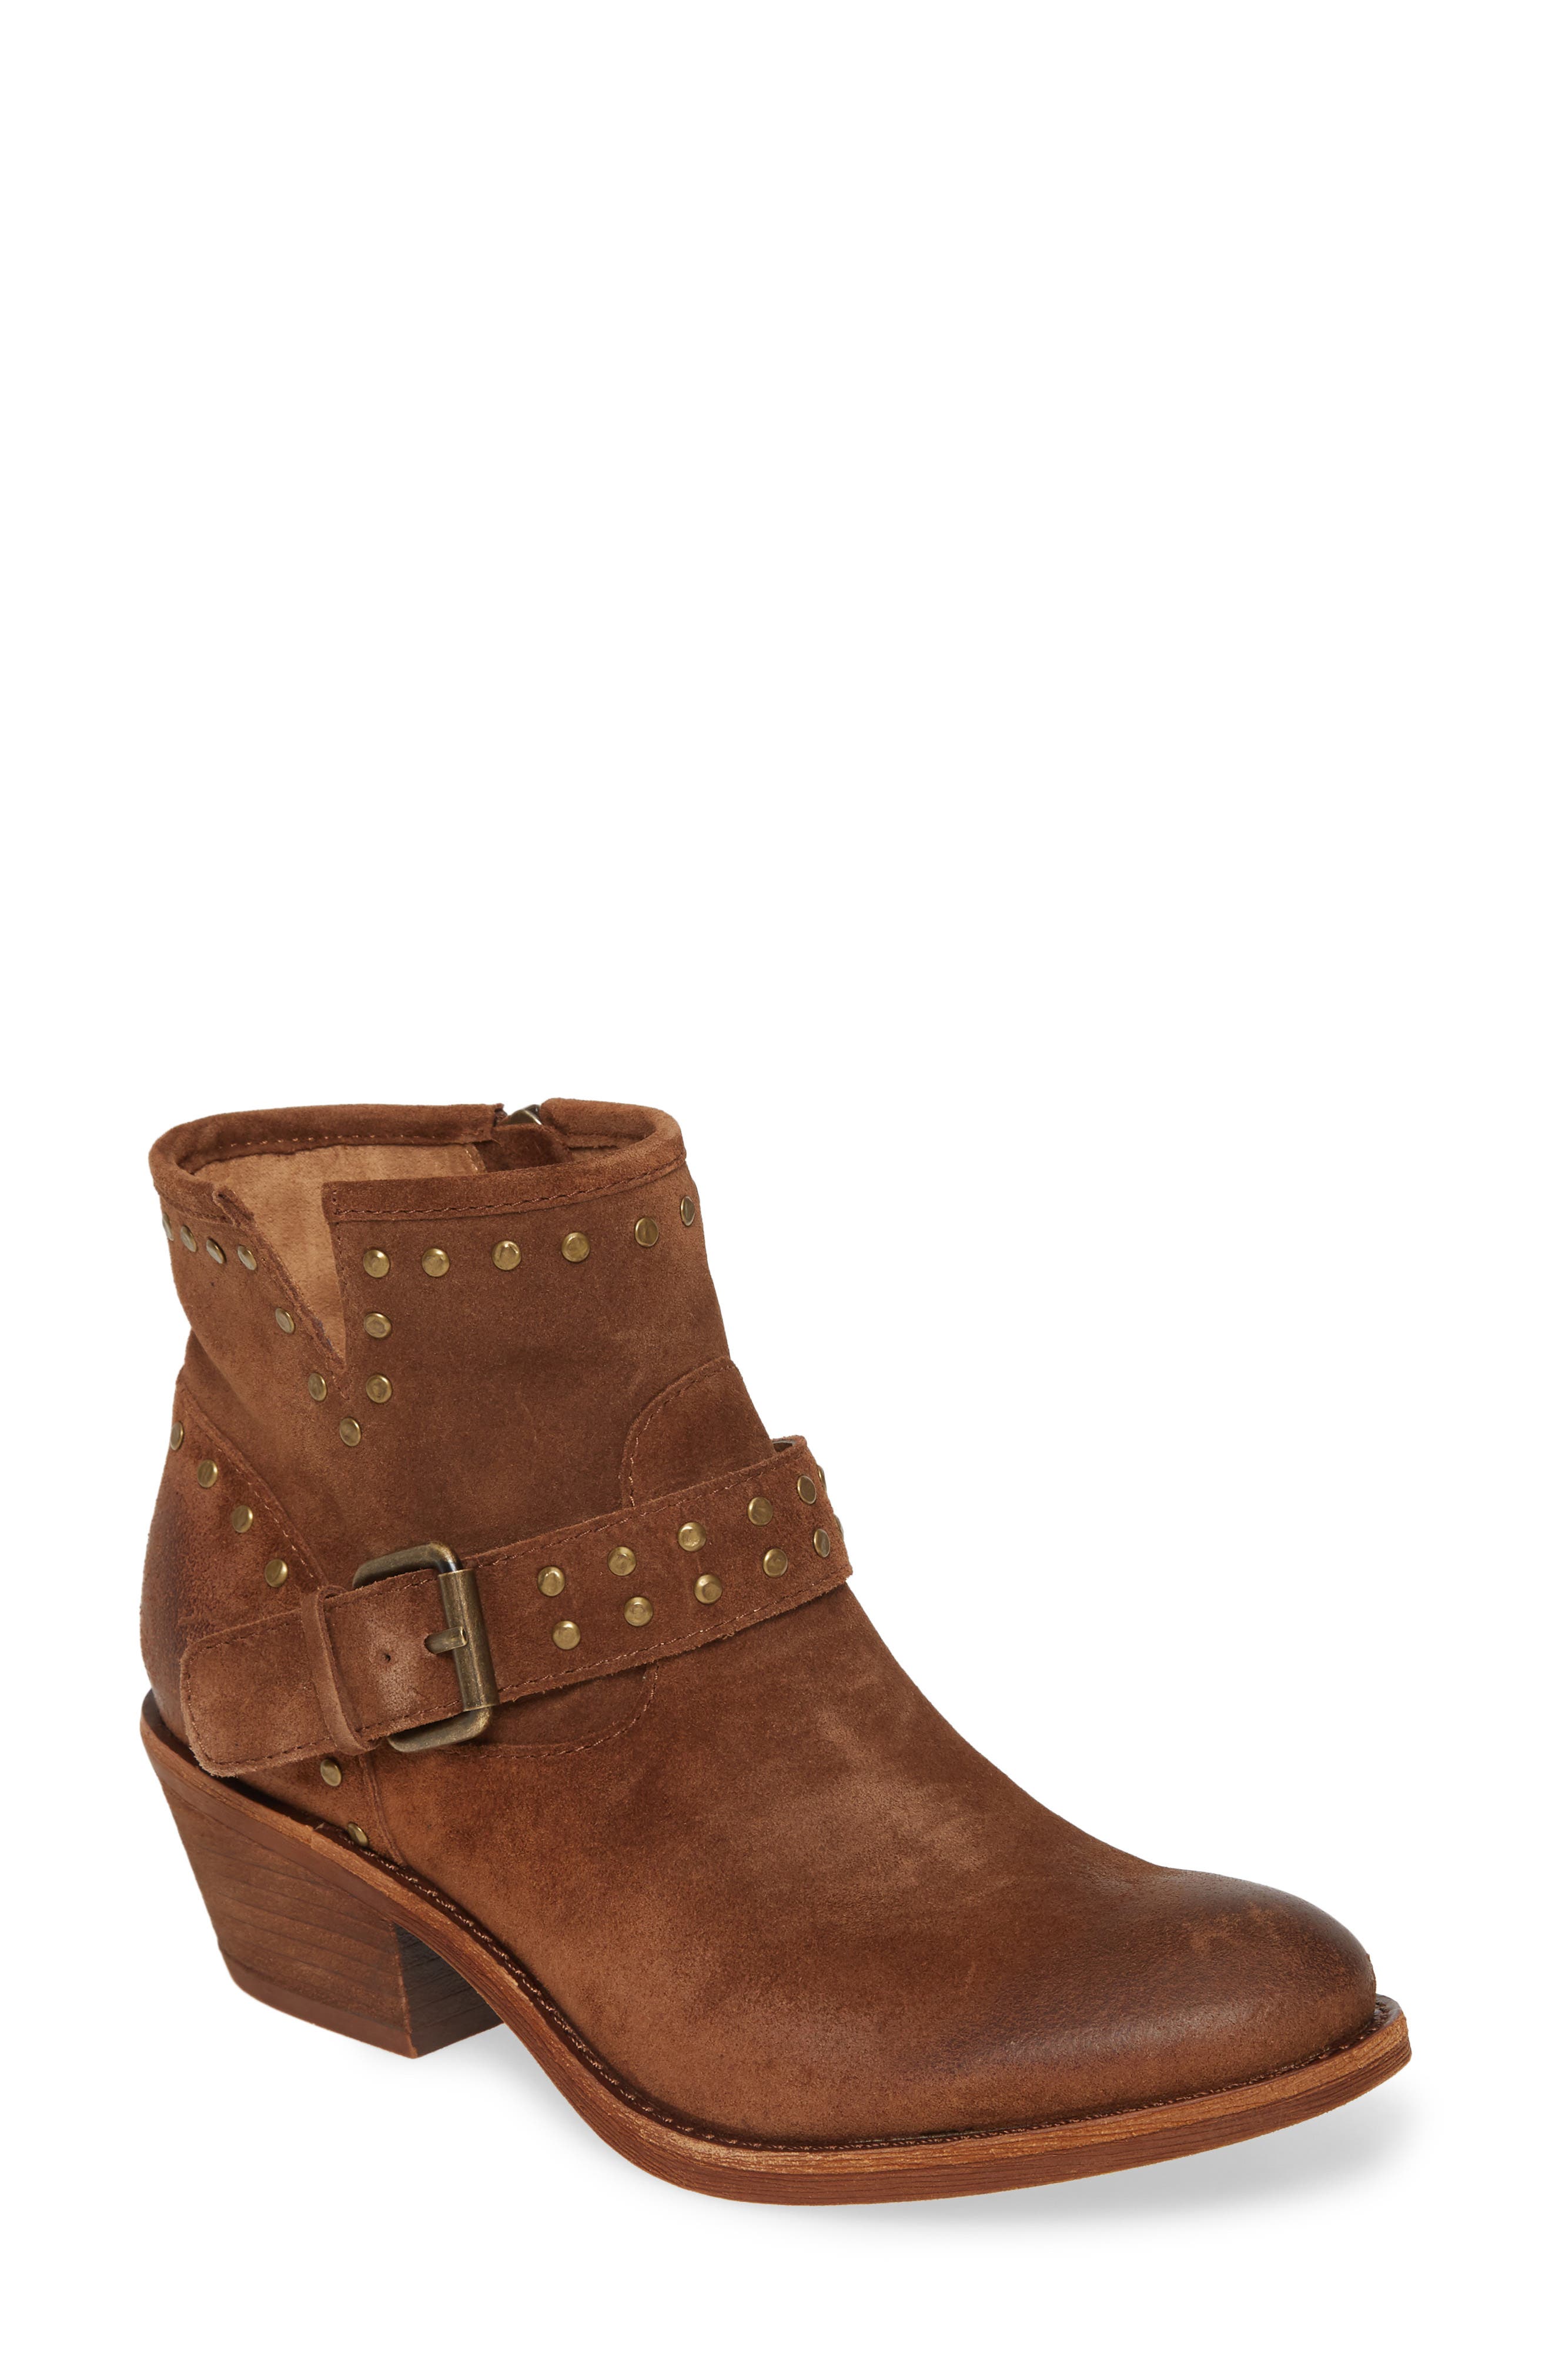 sofft allene boots